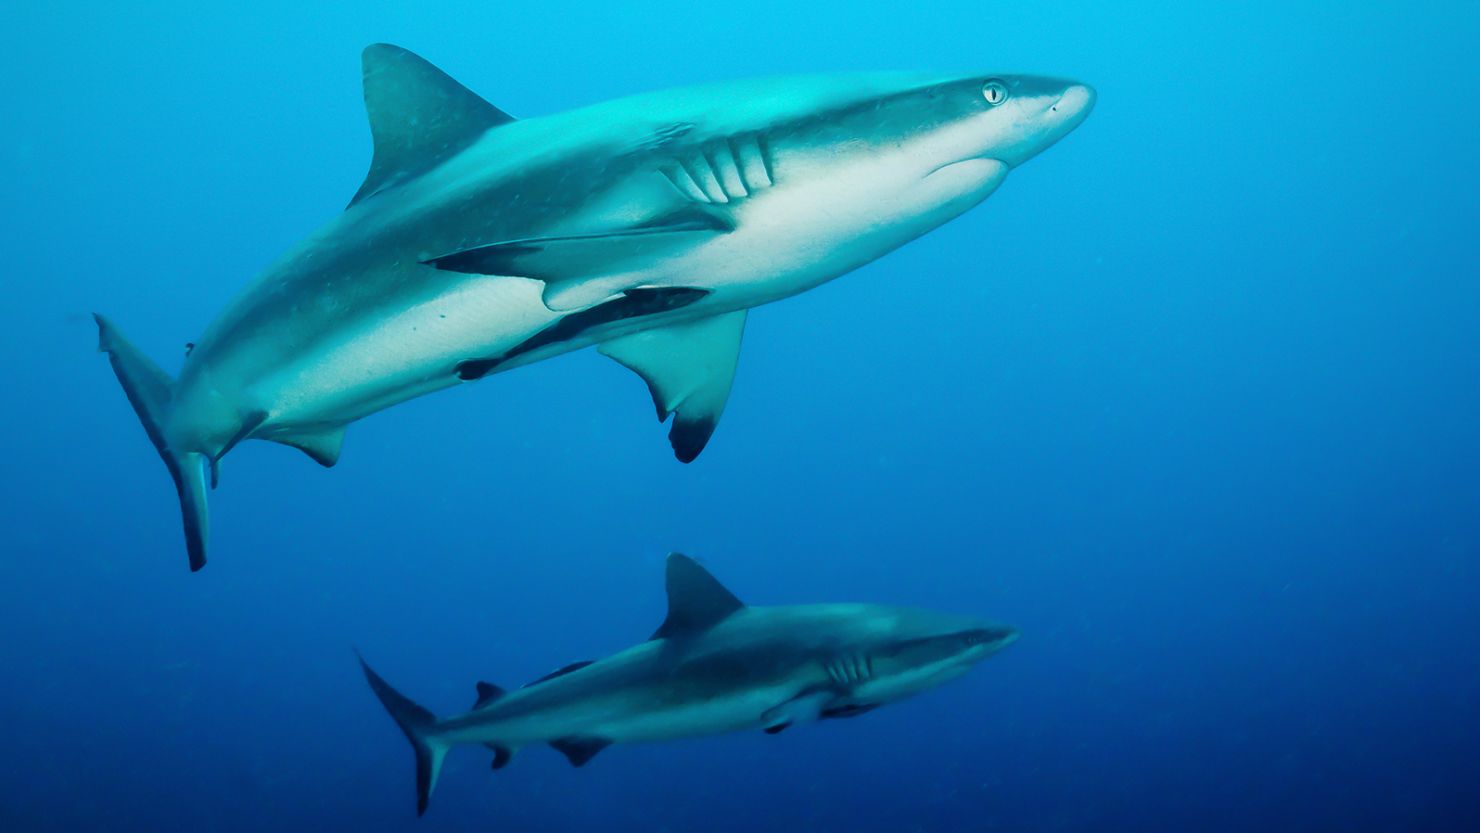 Researchers implanted transmitters into gray reef sharks at an atoll in the Pacific and found that the animals are quite a bit more social than previously thought.